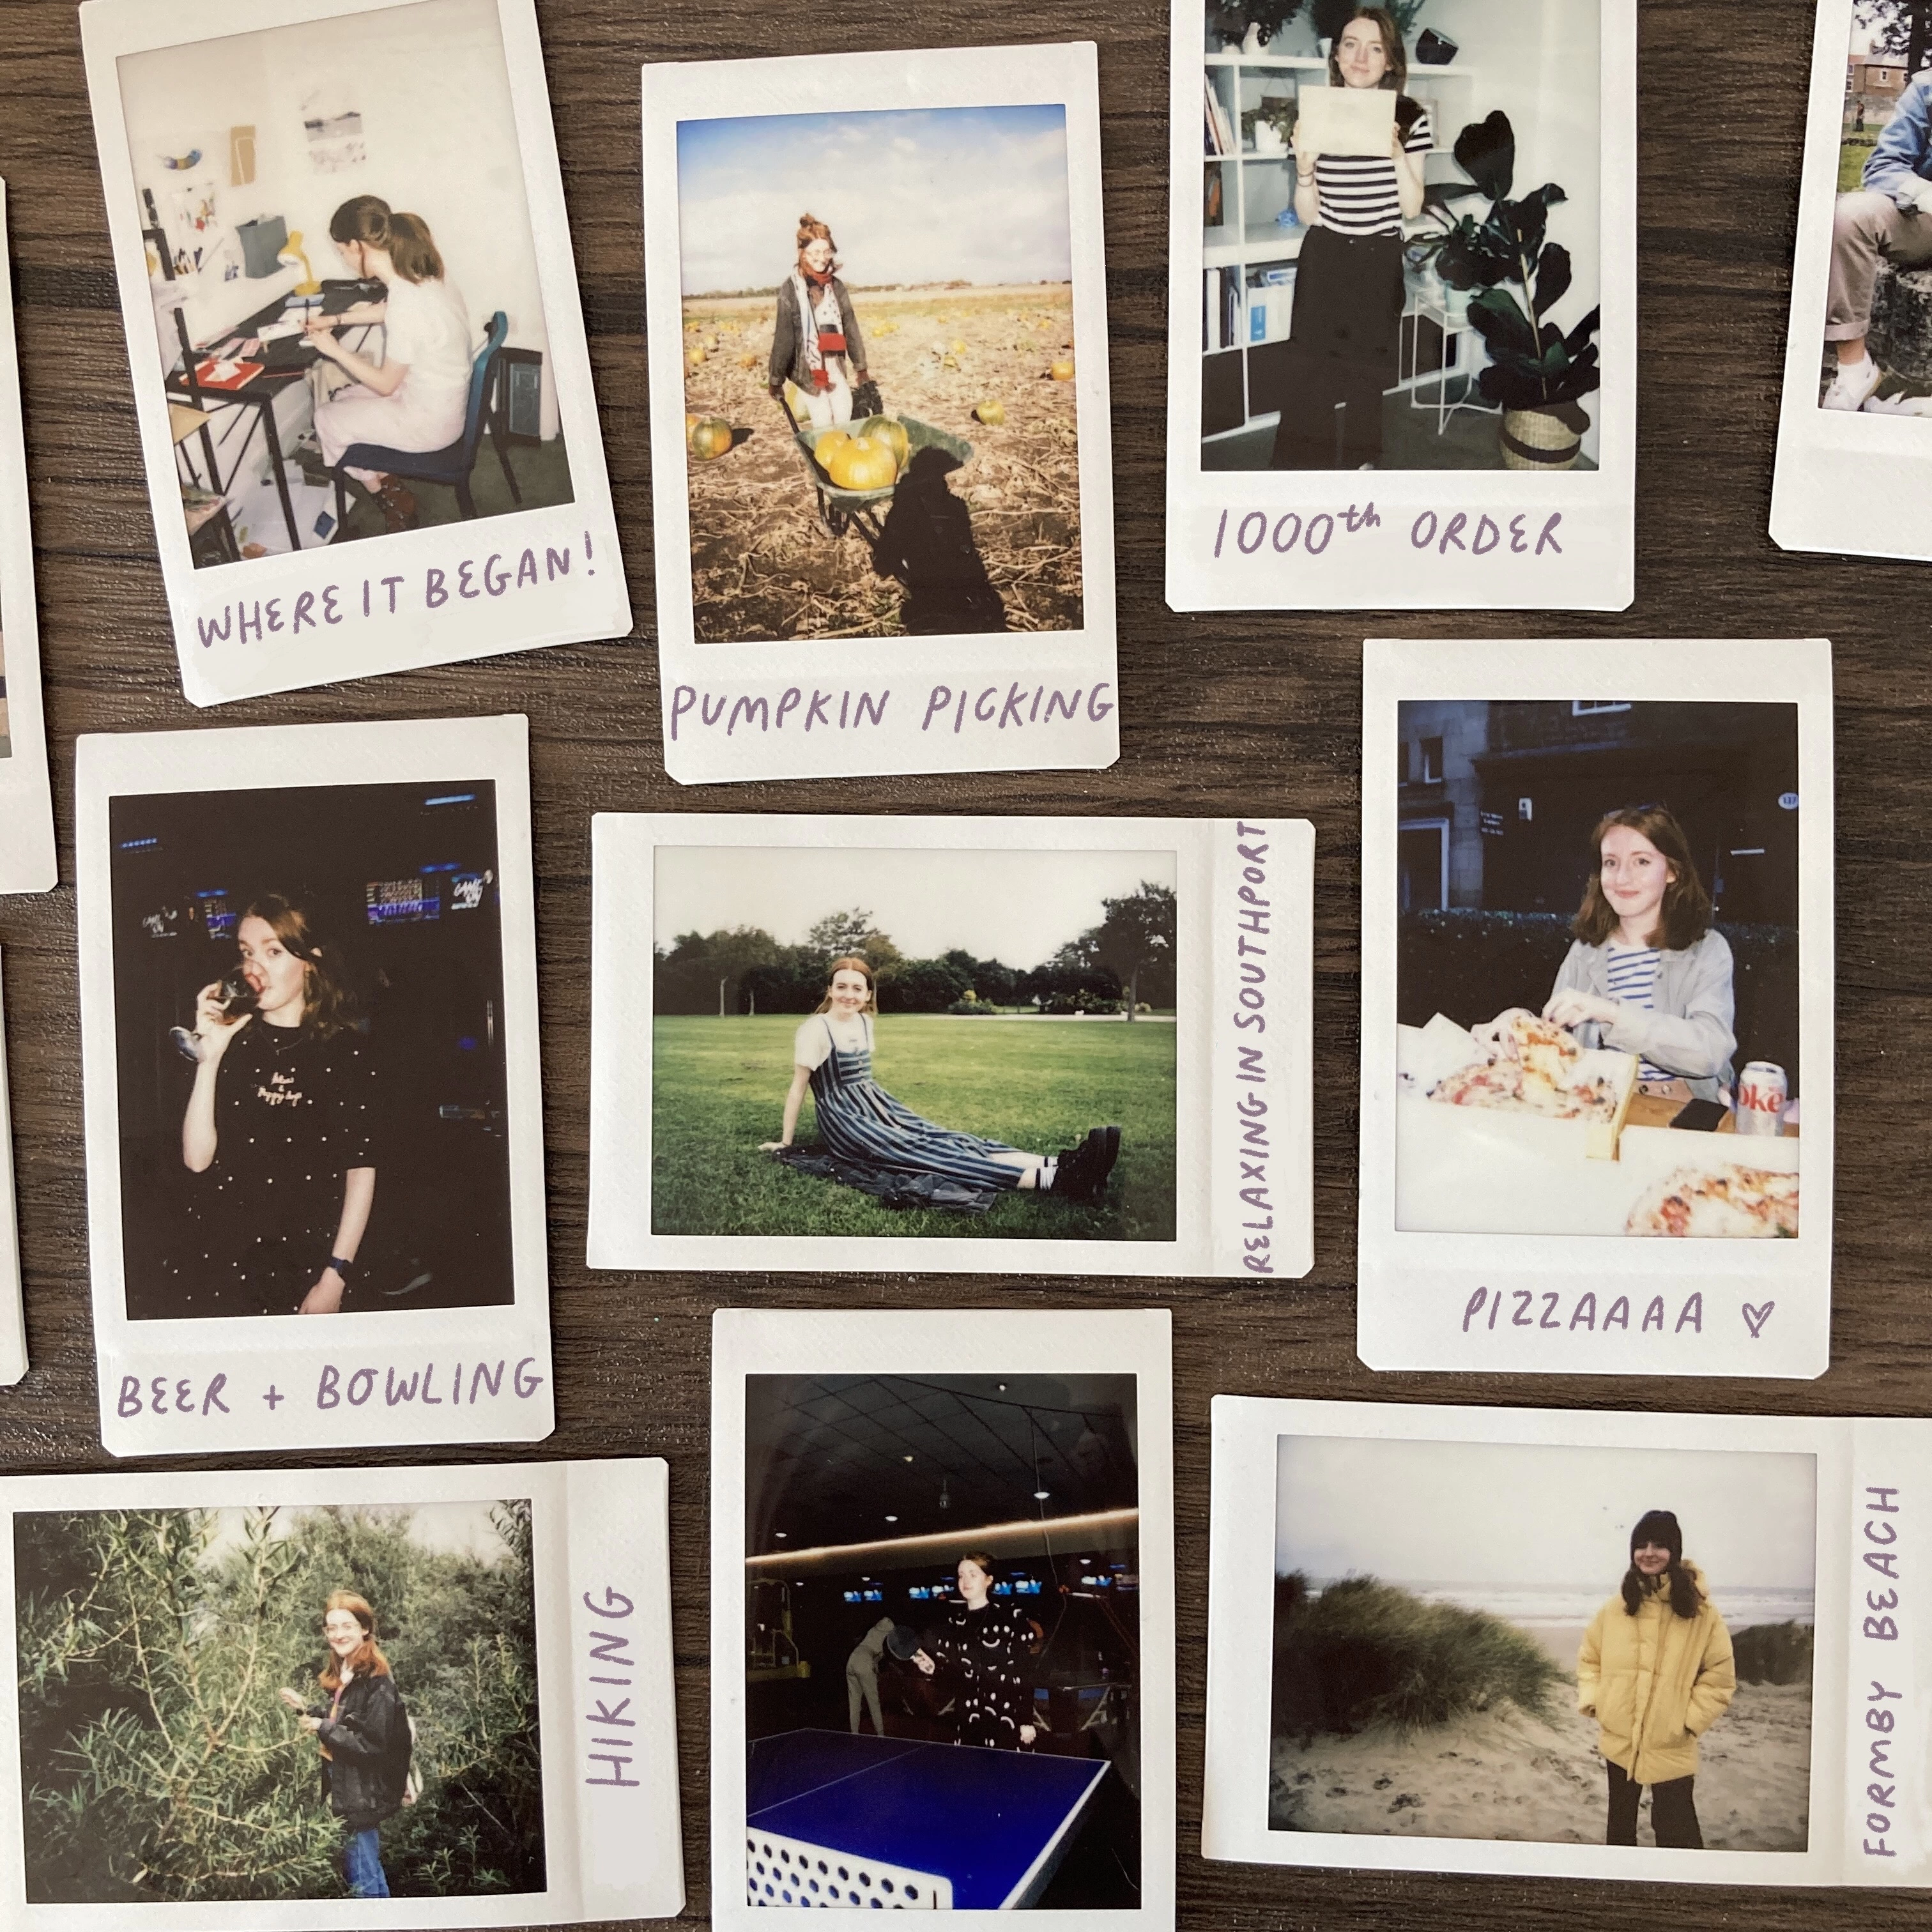 Collection of  polaroid images of Laura - including photos of my desk, pumpkin picking, ginger woman eating a pizza, going for a hike. 